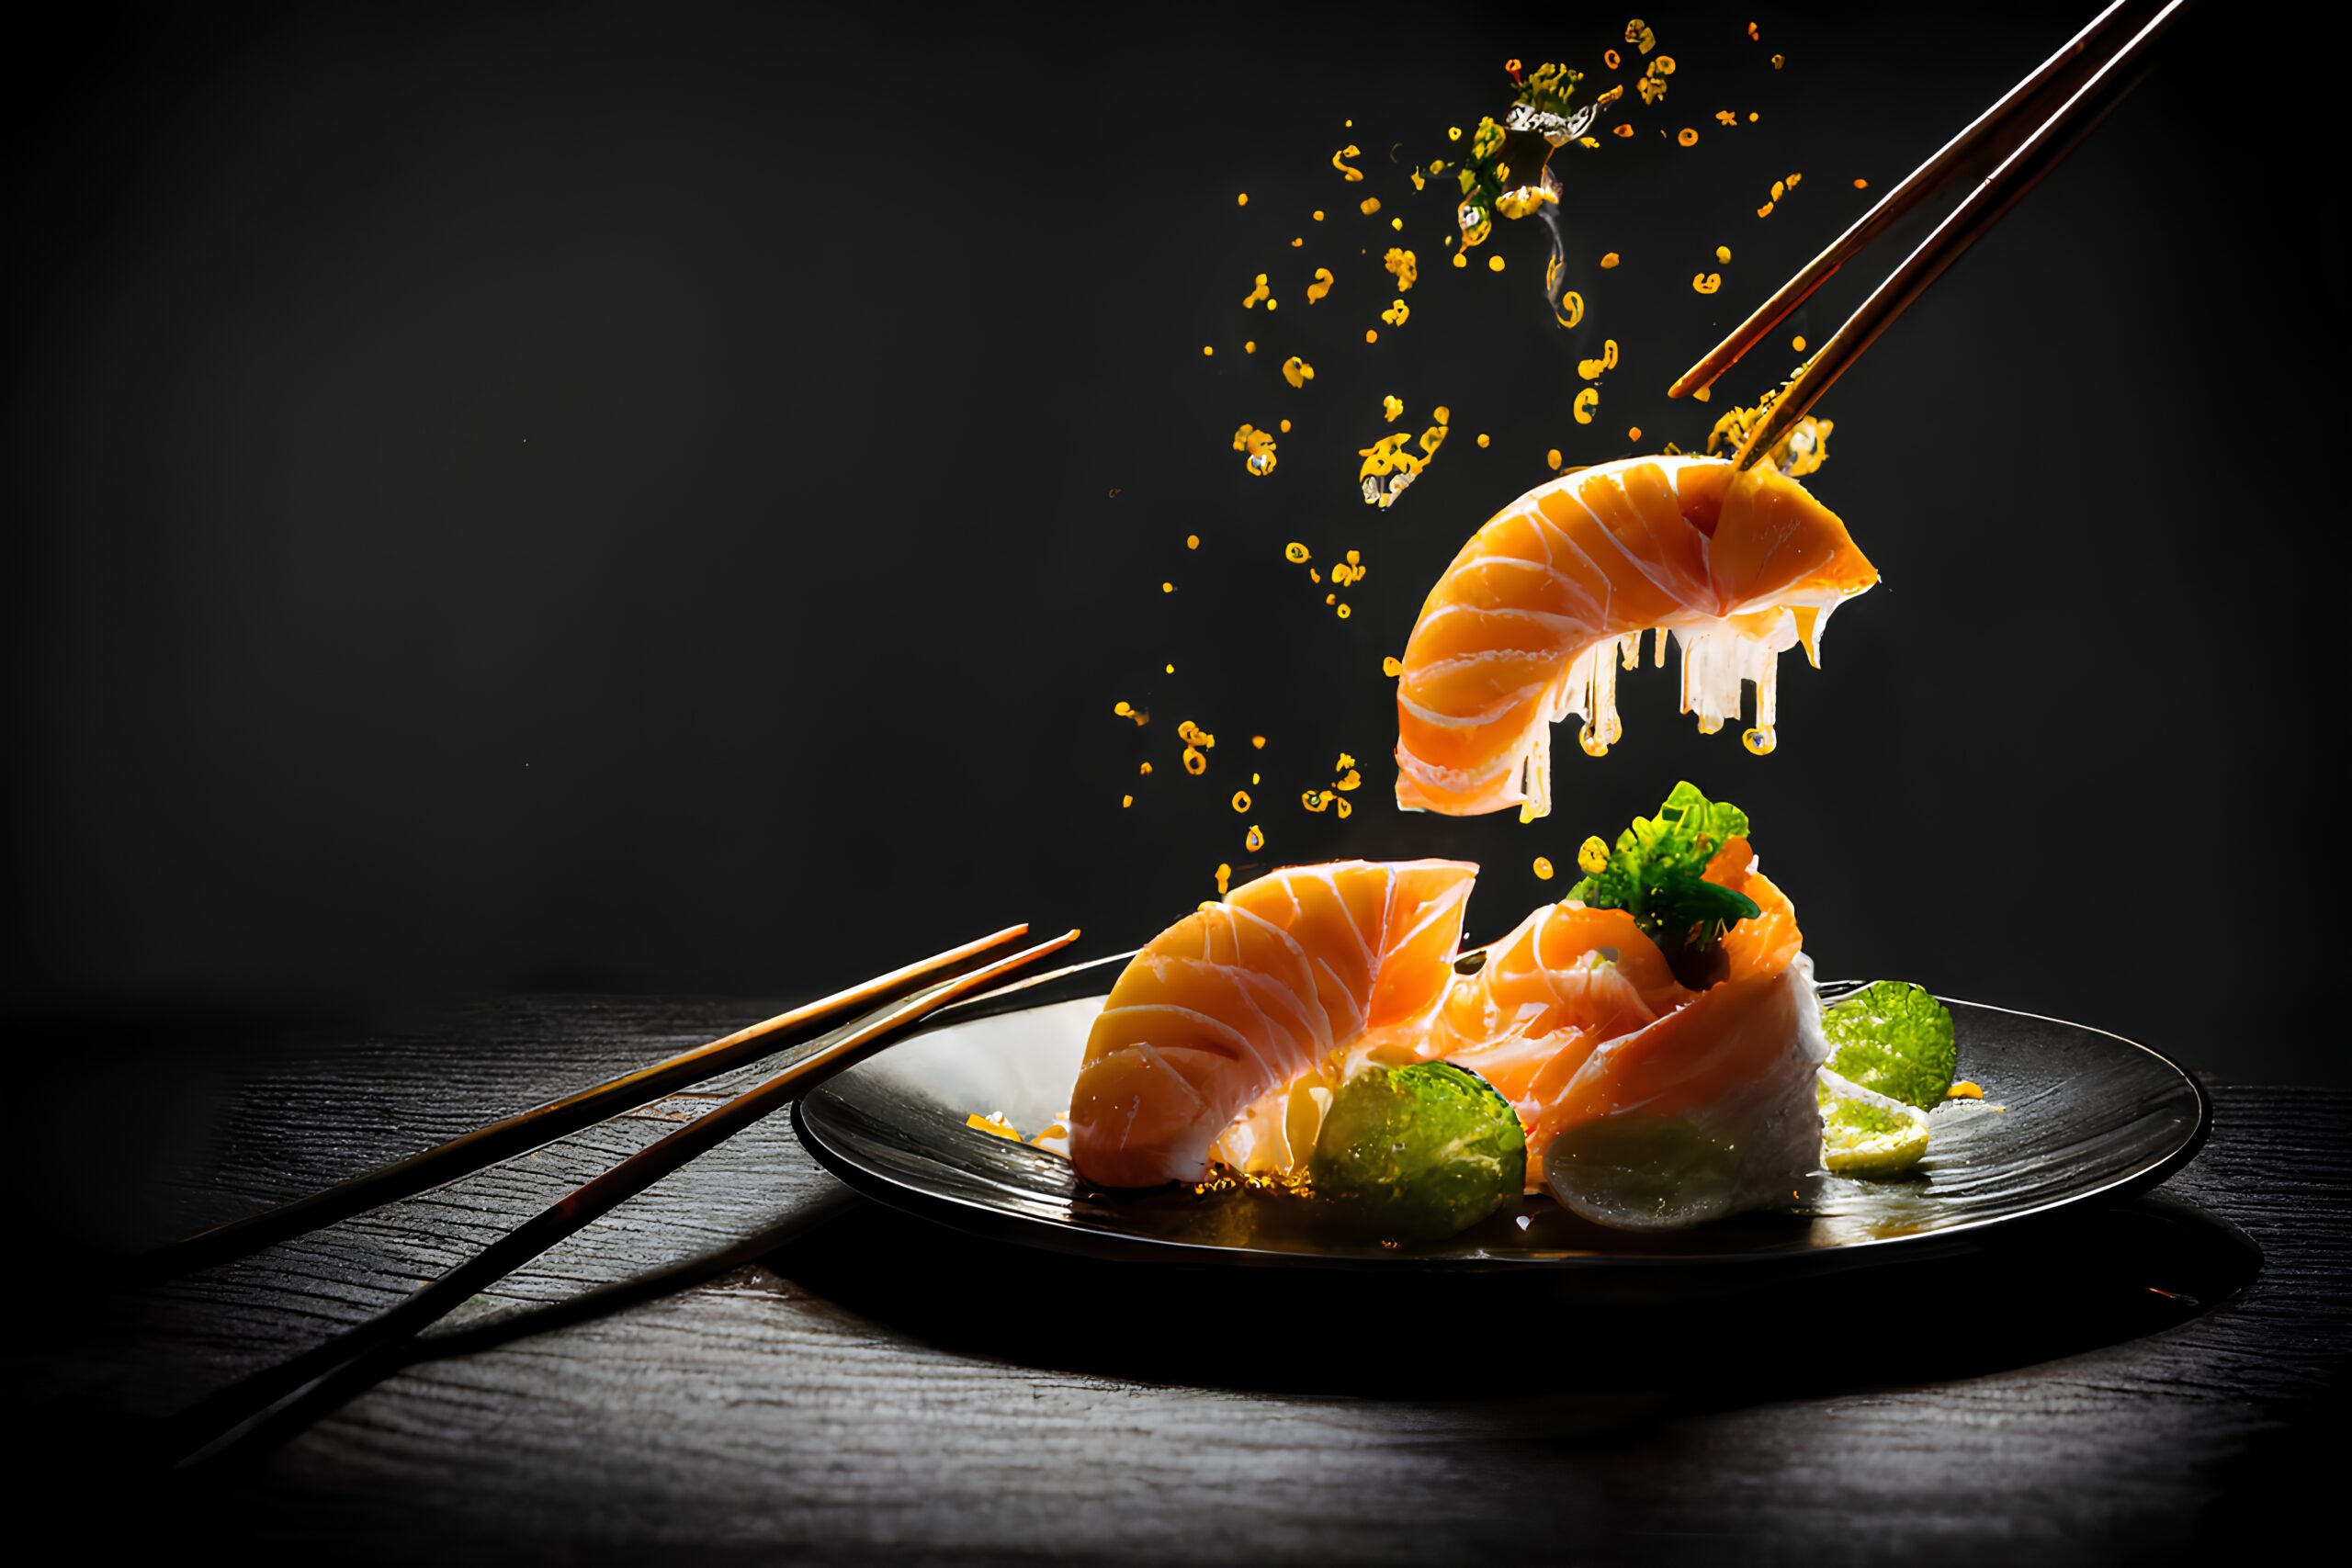 5 fun facts about Sushi